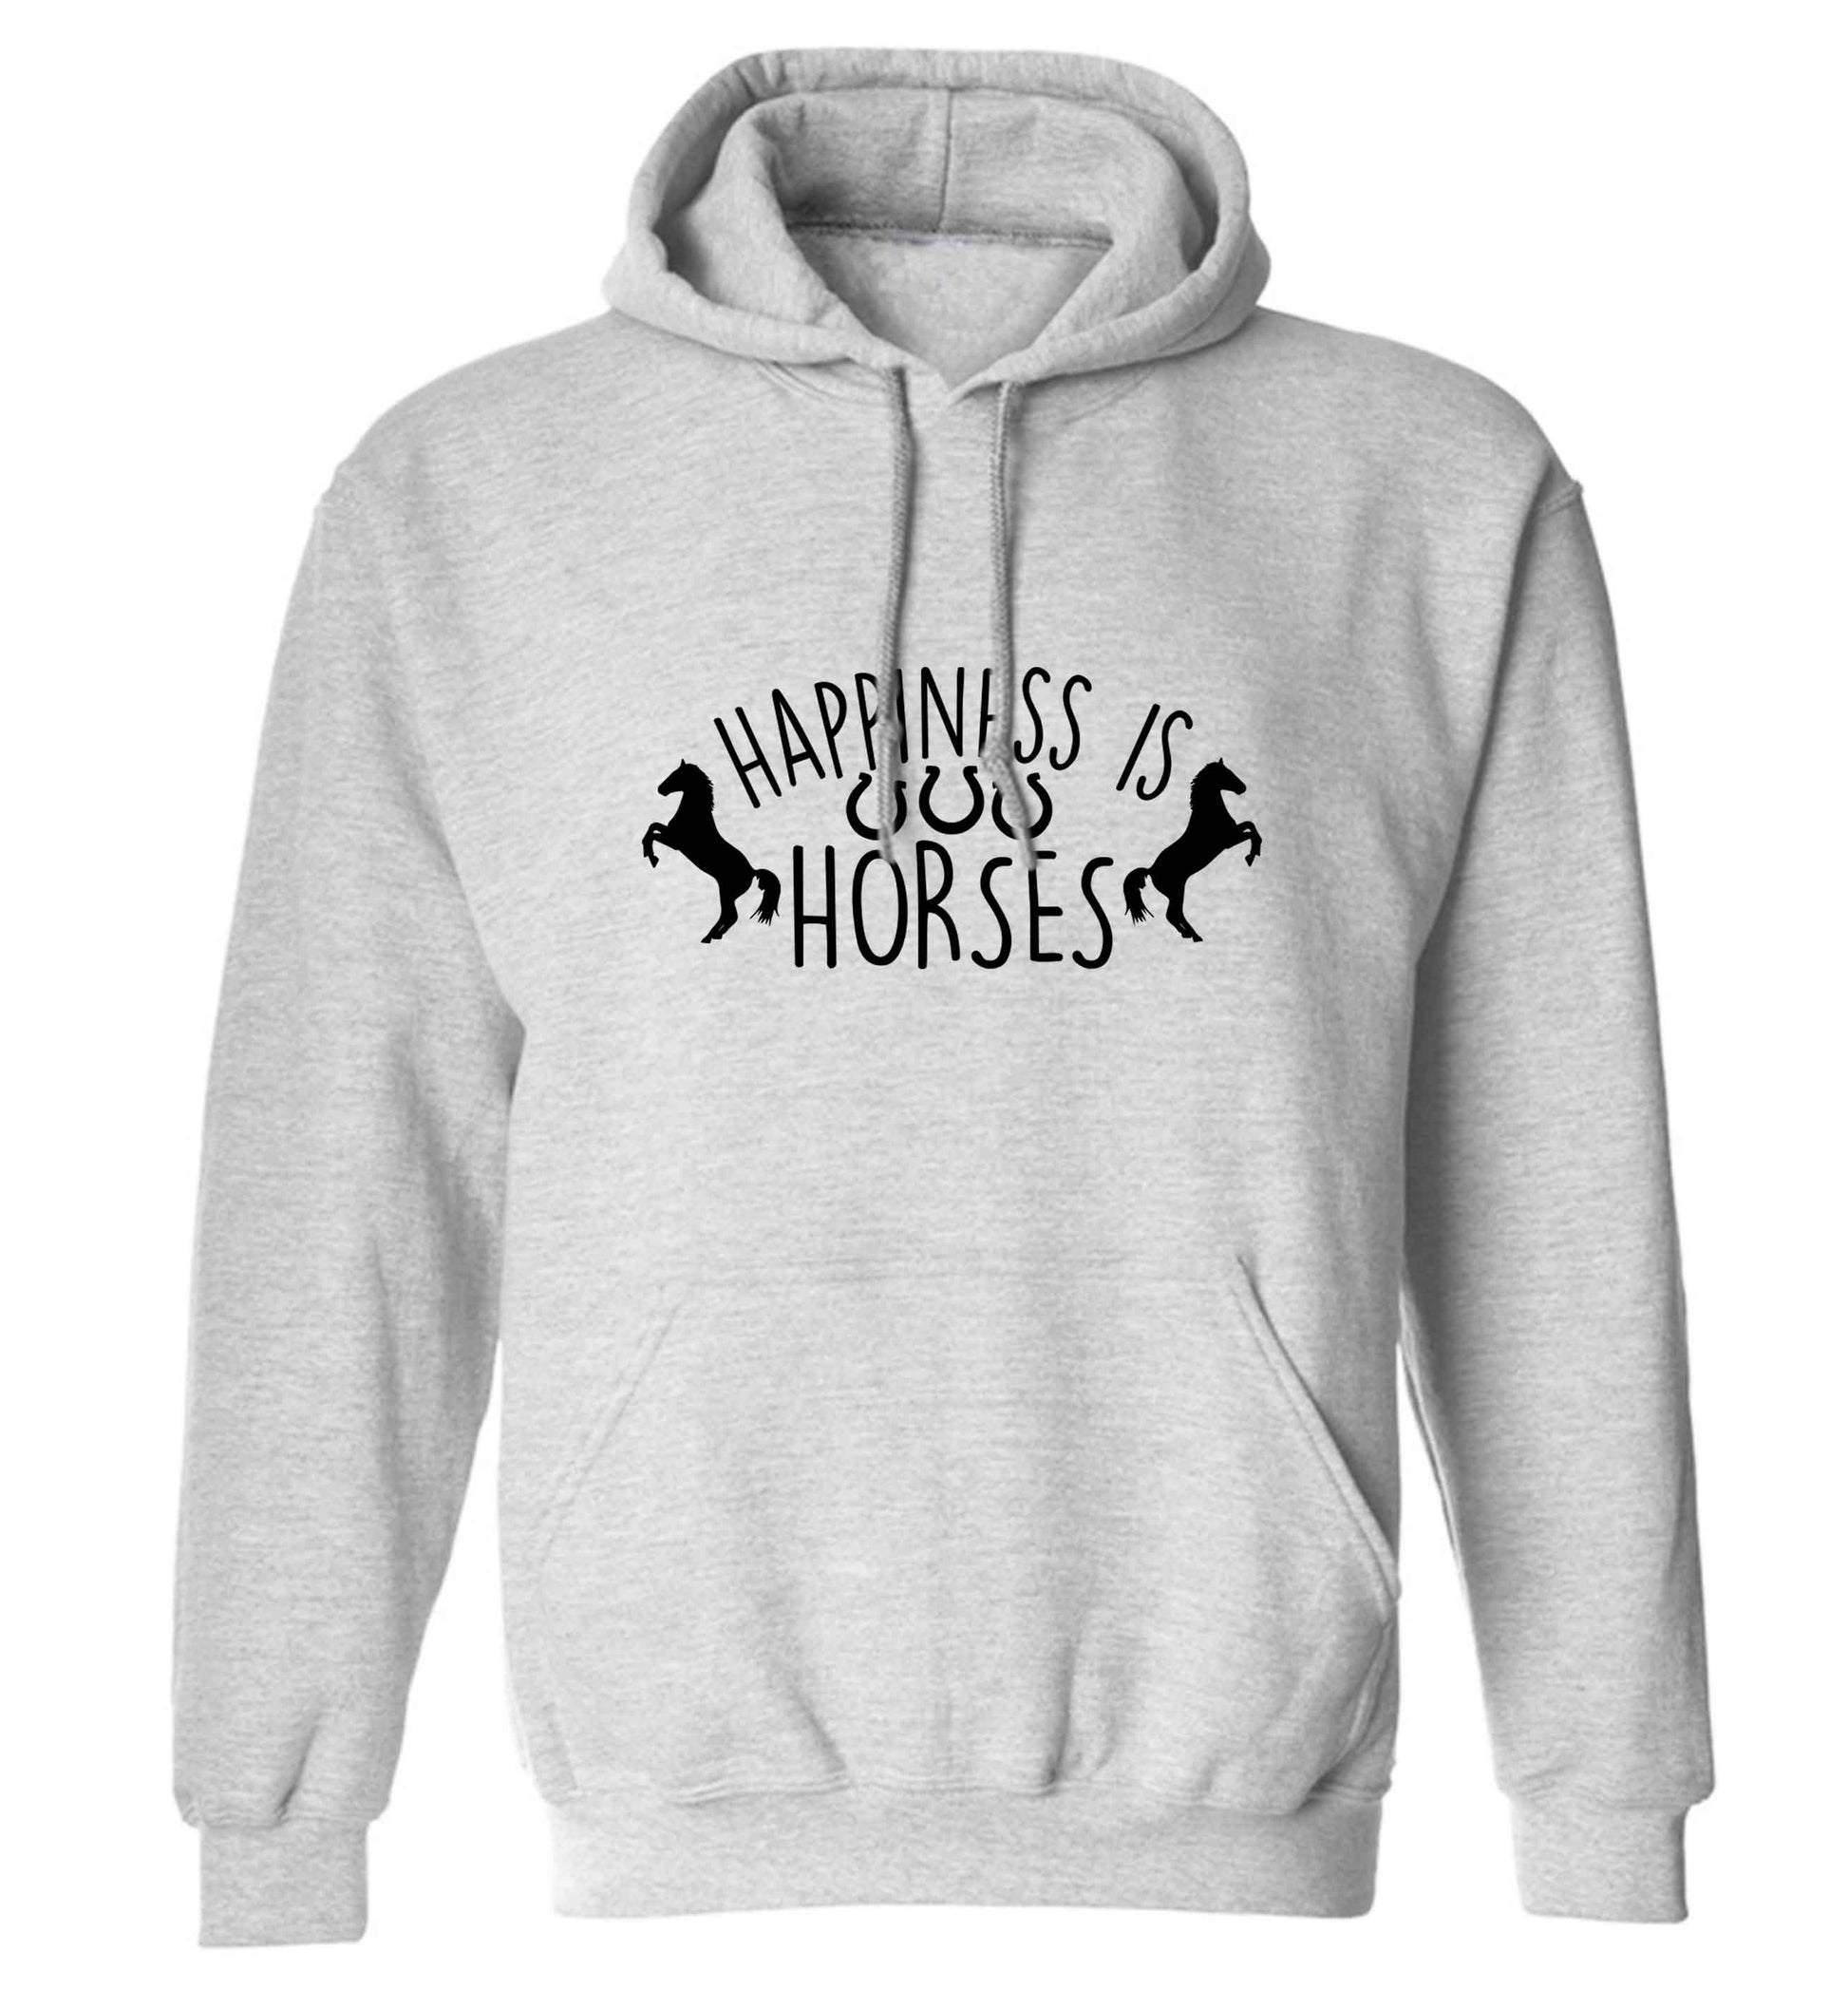 Happiness is horses adults unisex grey hoodie 2XL